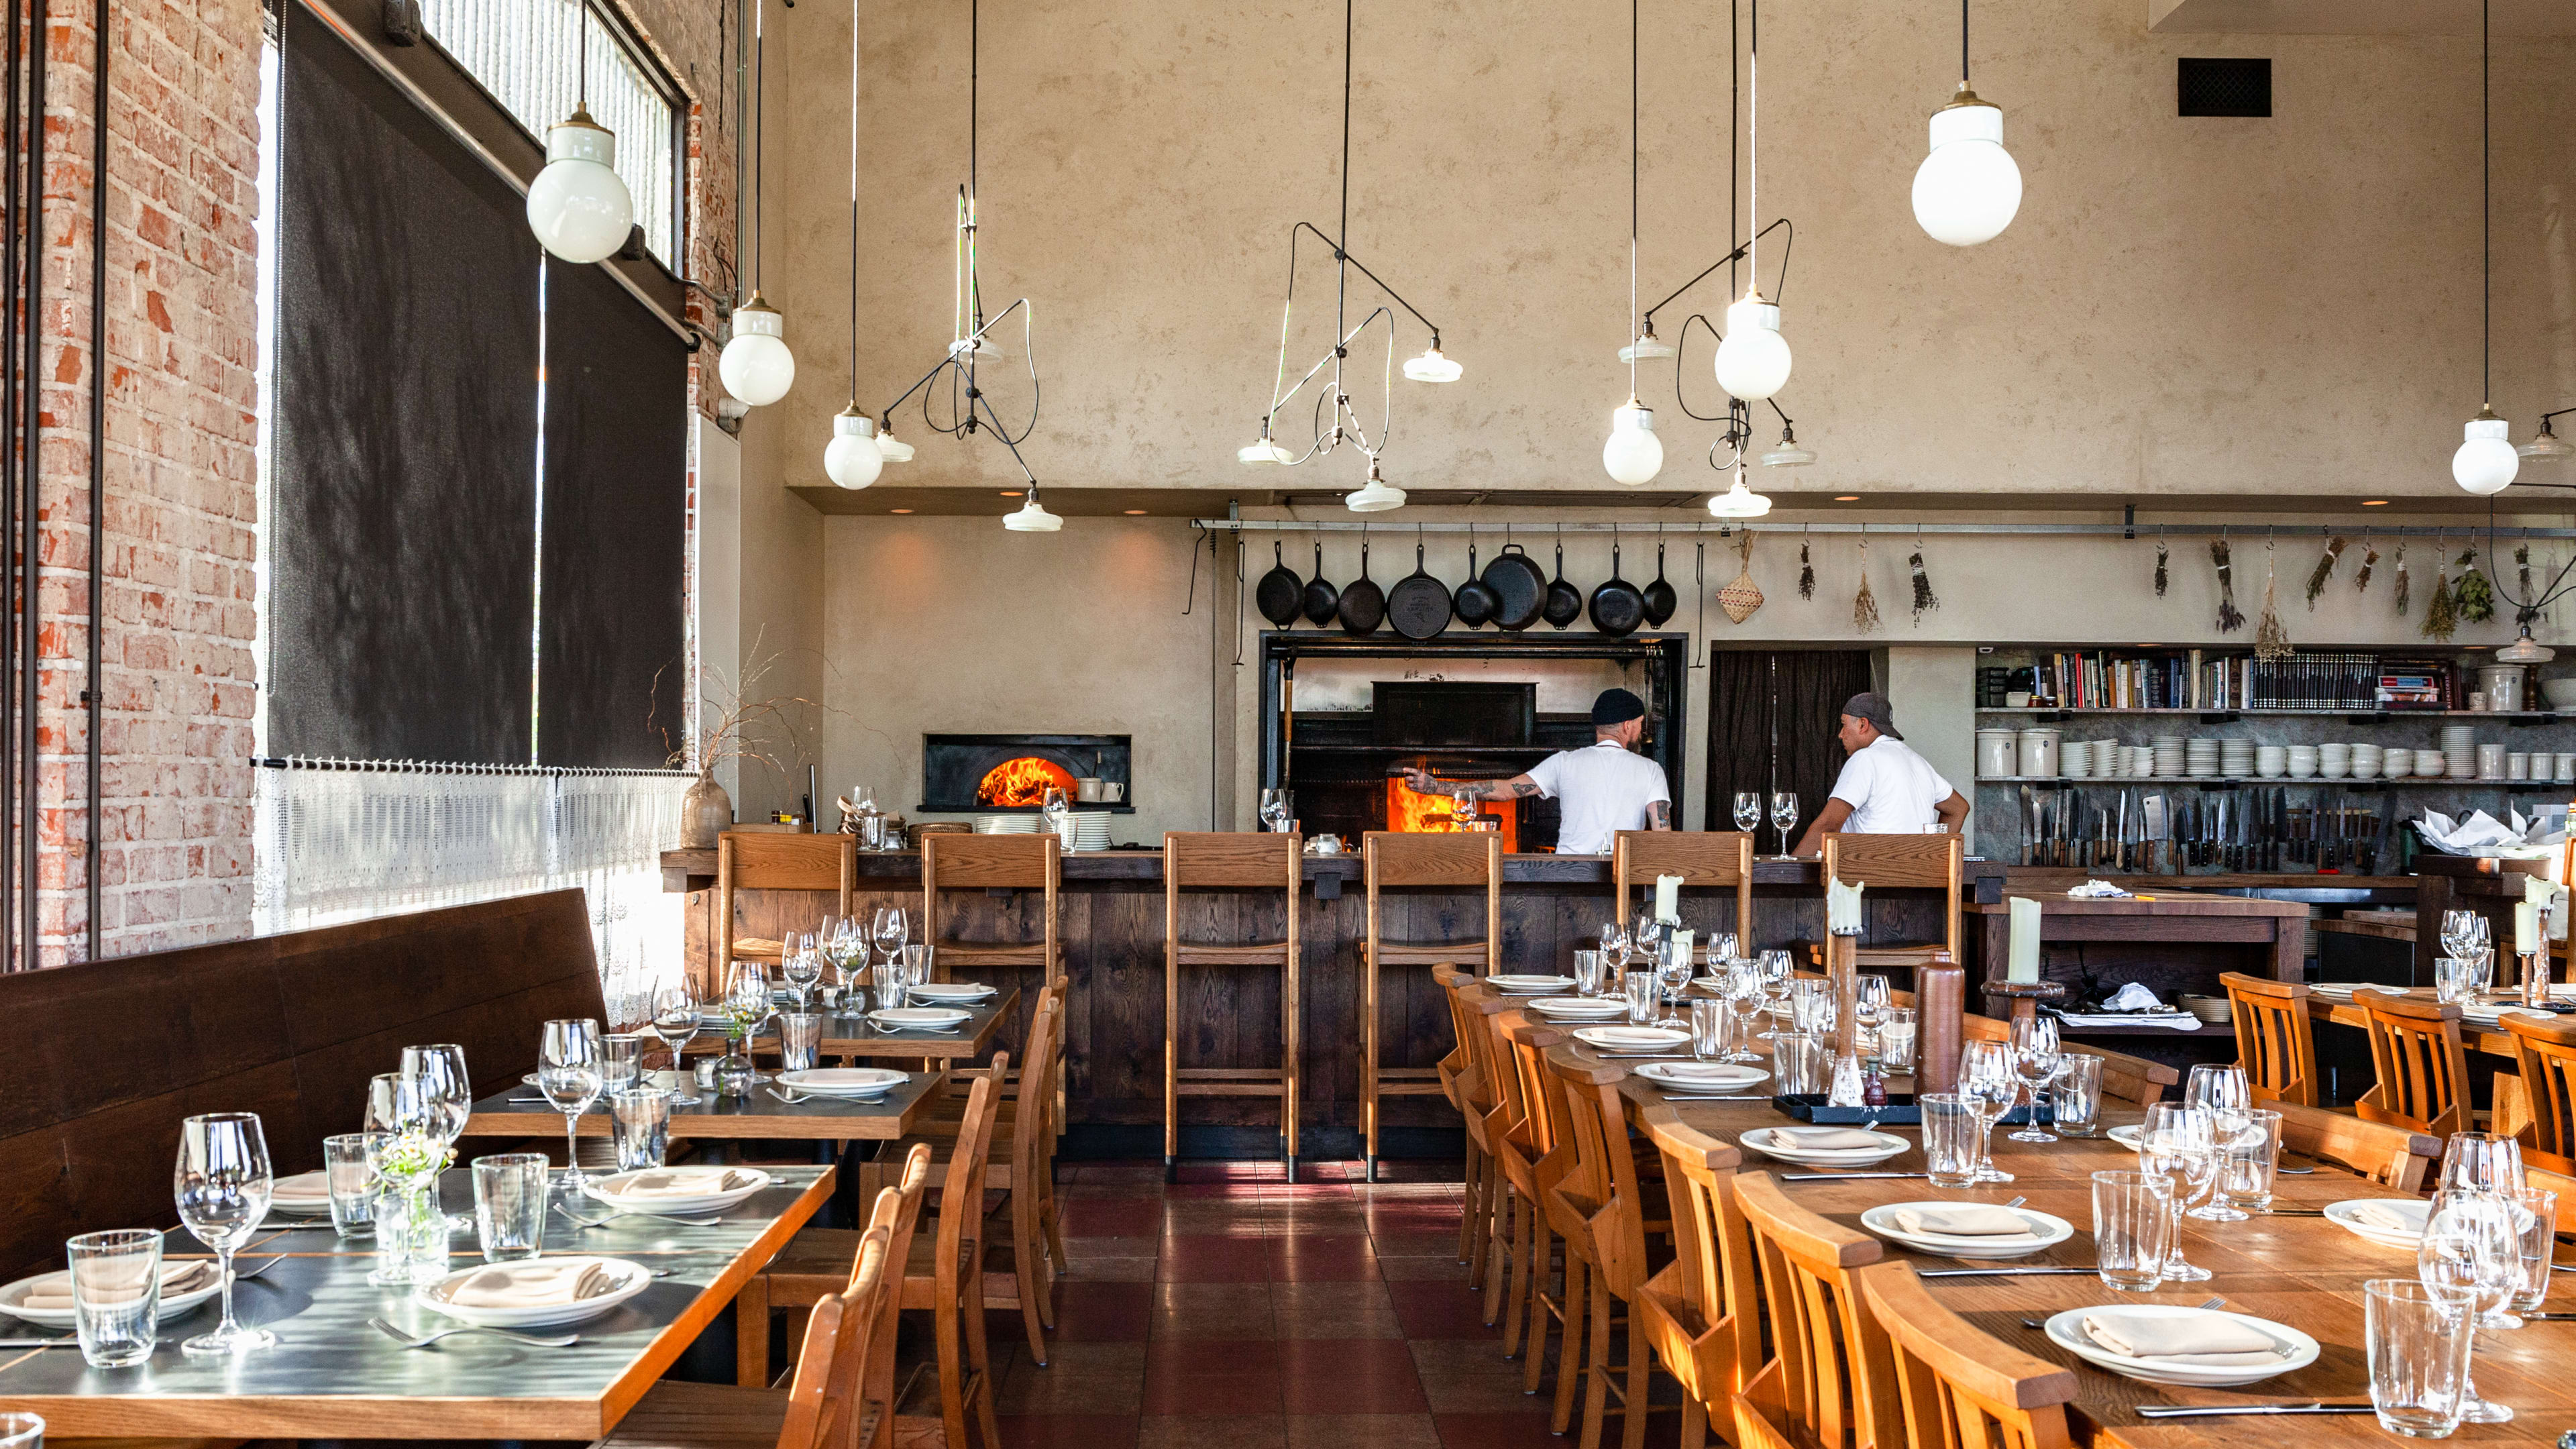 The interior of the dining space at Dunsmoor. There are wooden tables, high ceilings, hanging bulb pendants, and cast iron pans hanging above a live fire hearth.